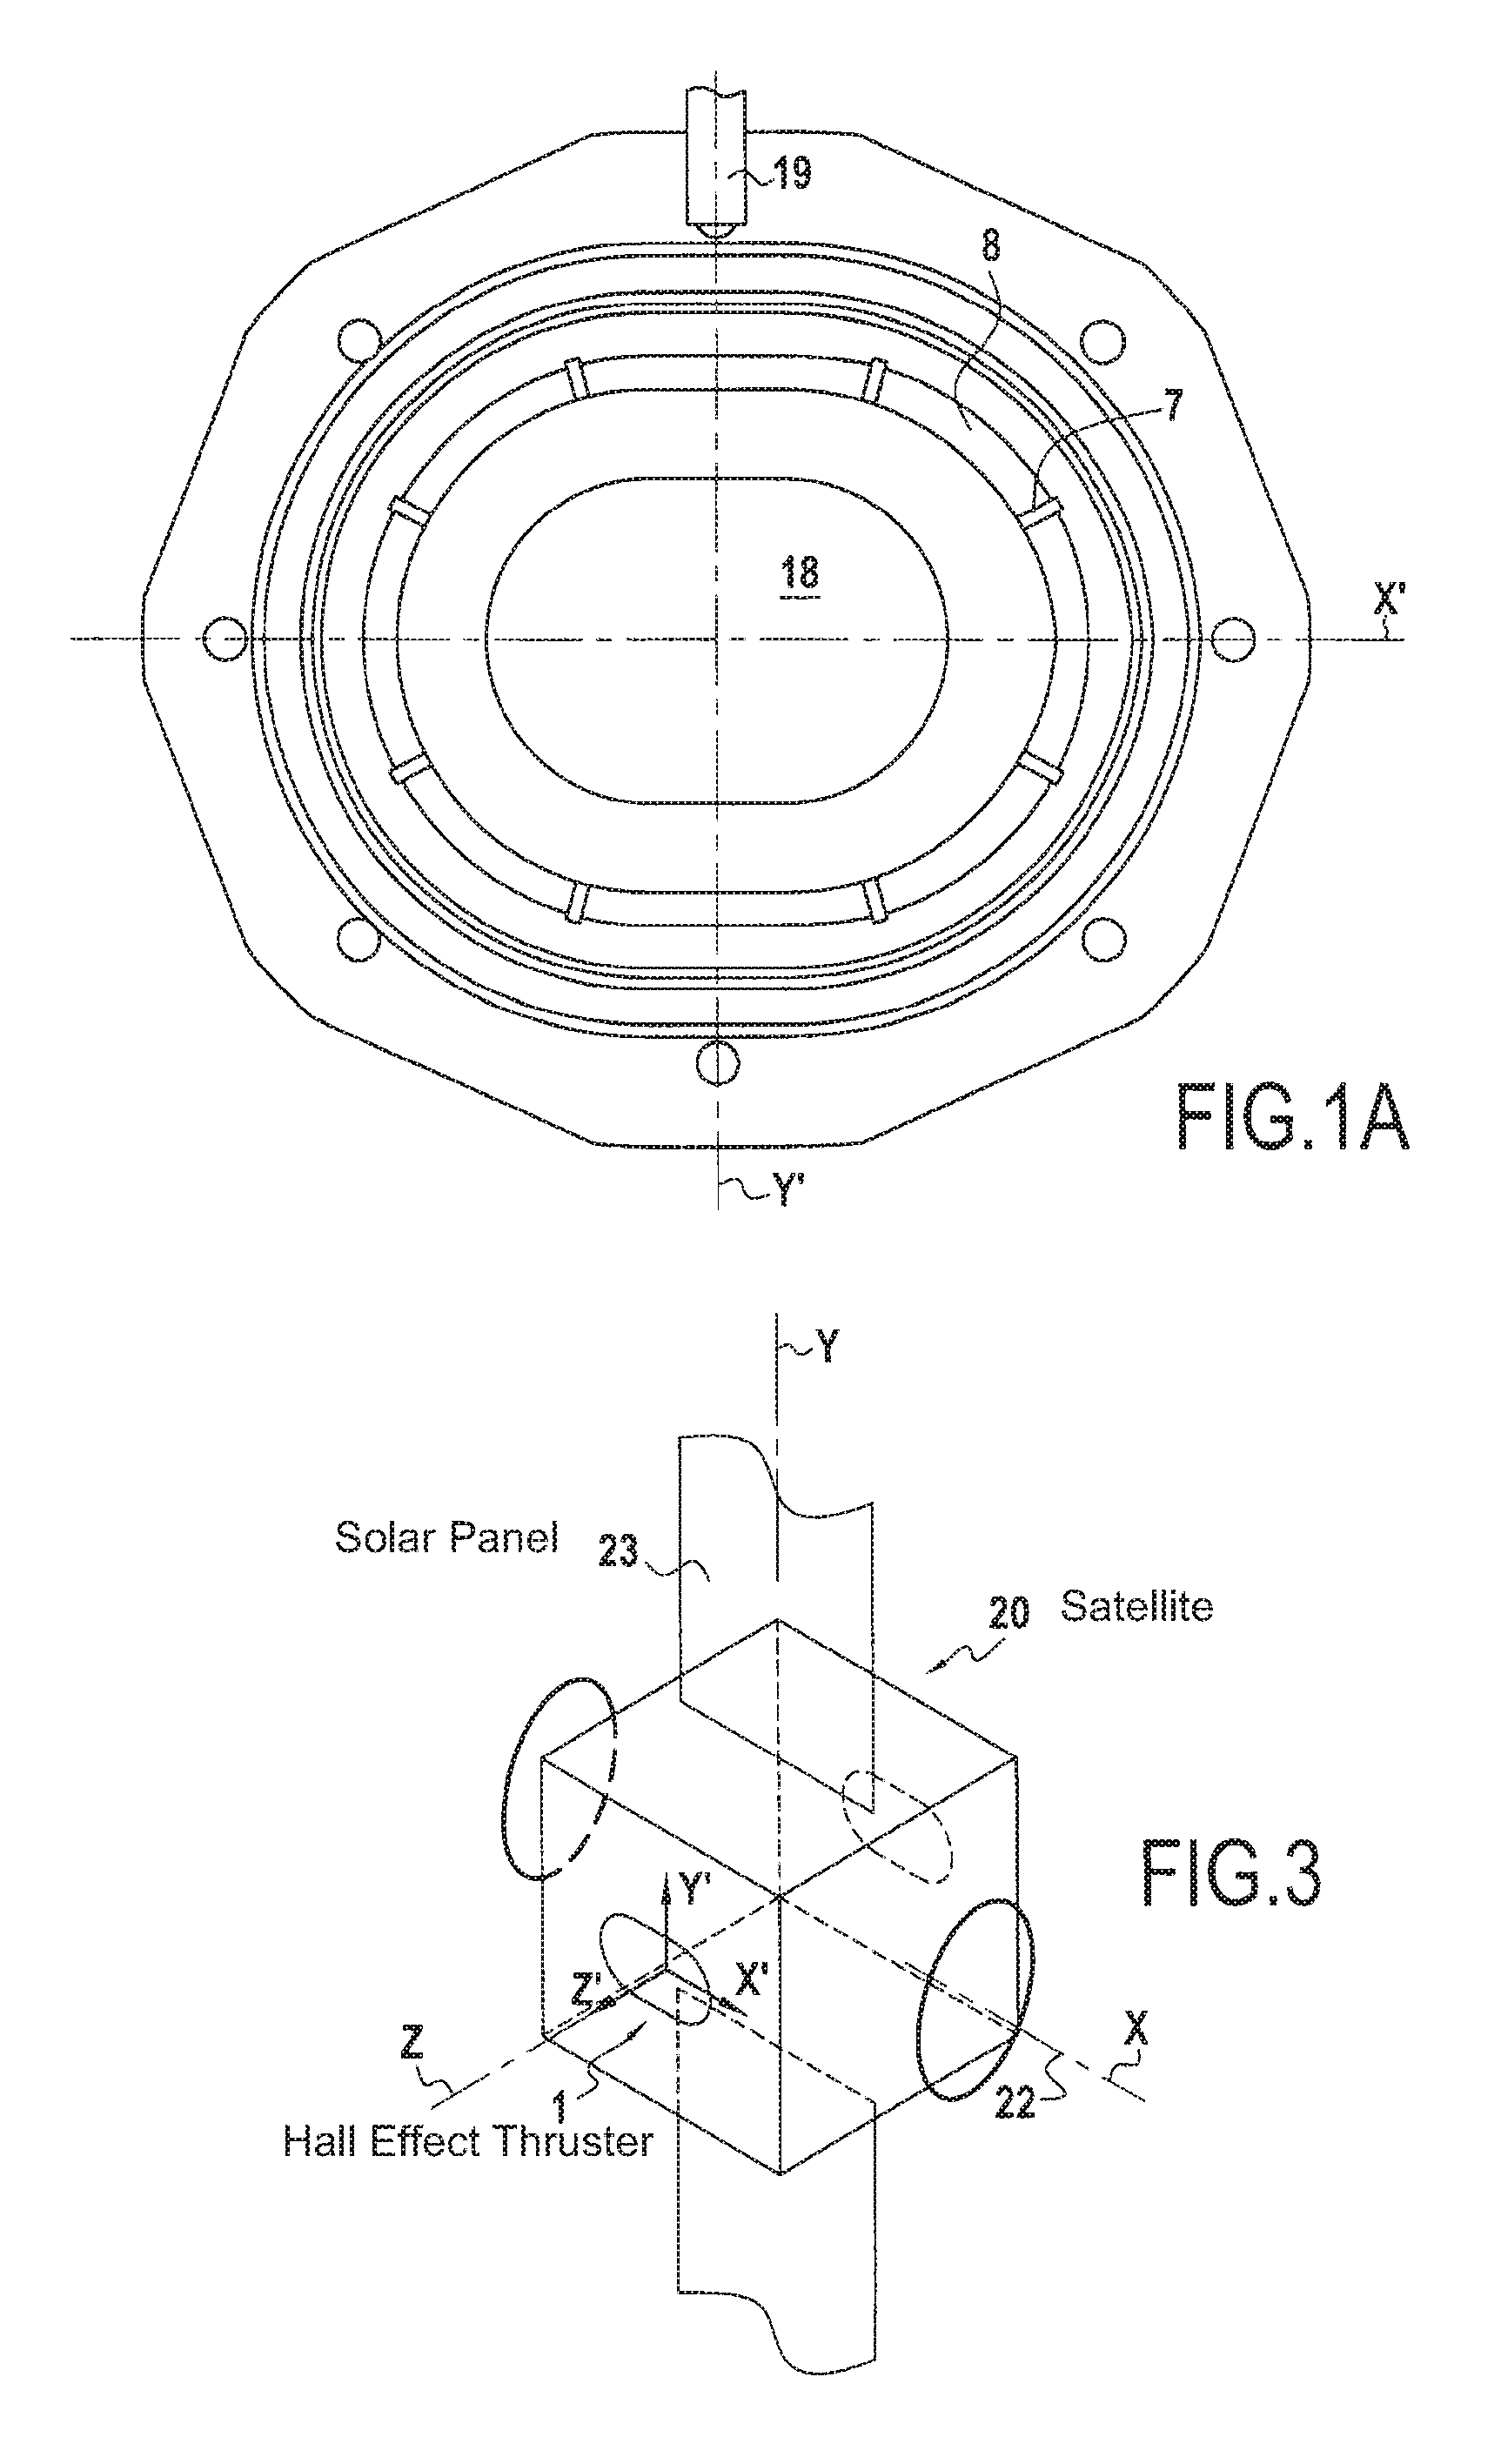 Steerable hall effect thruster having plural independently controllable propellant injectors and a frustoconical exhaust outlet